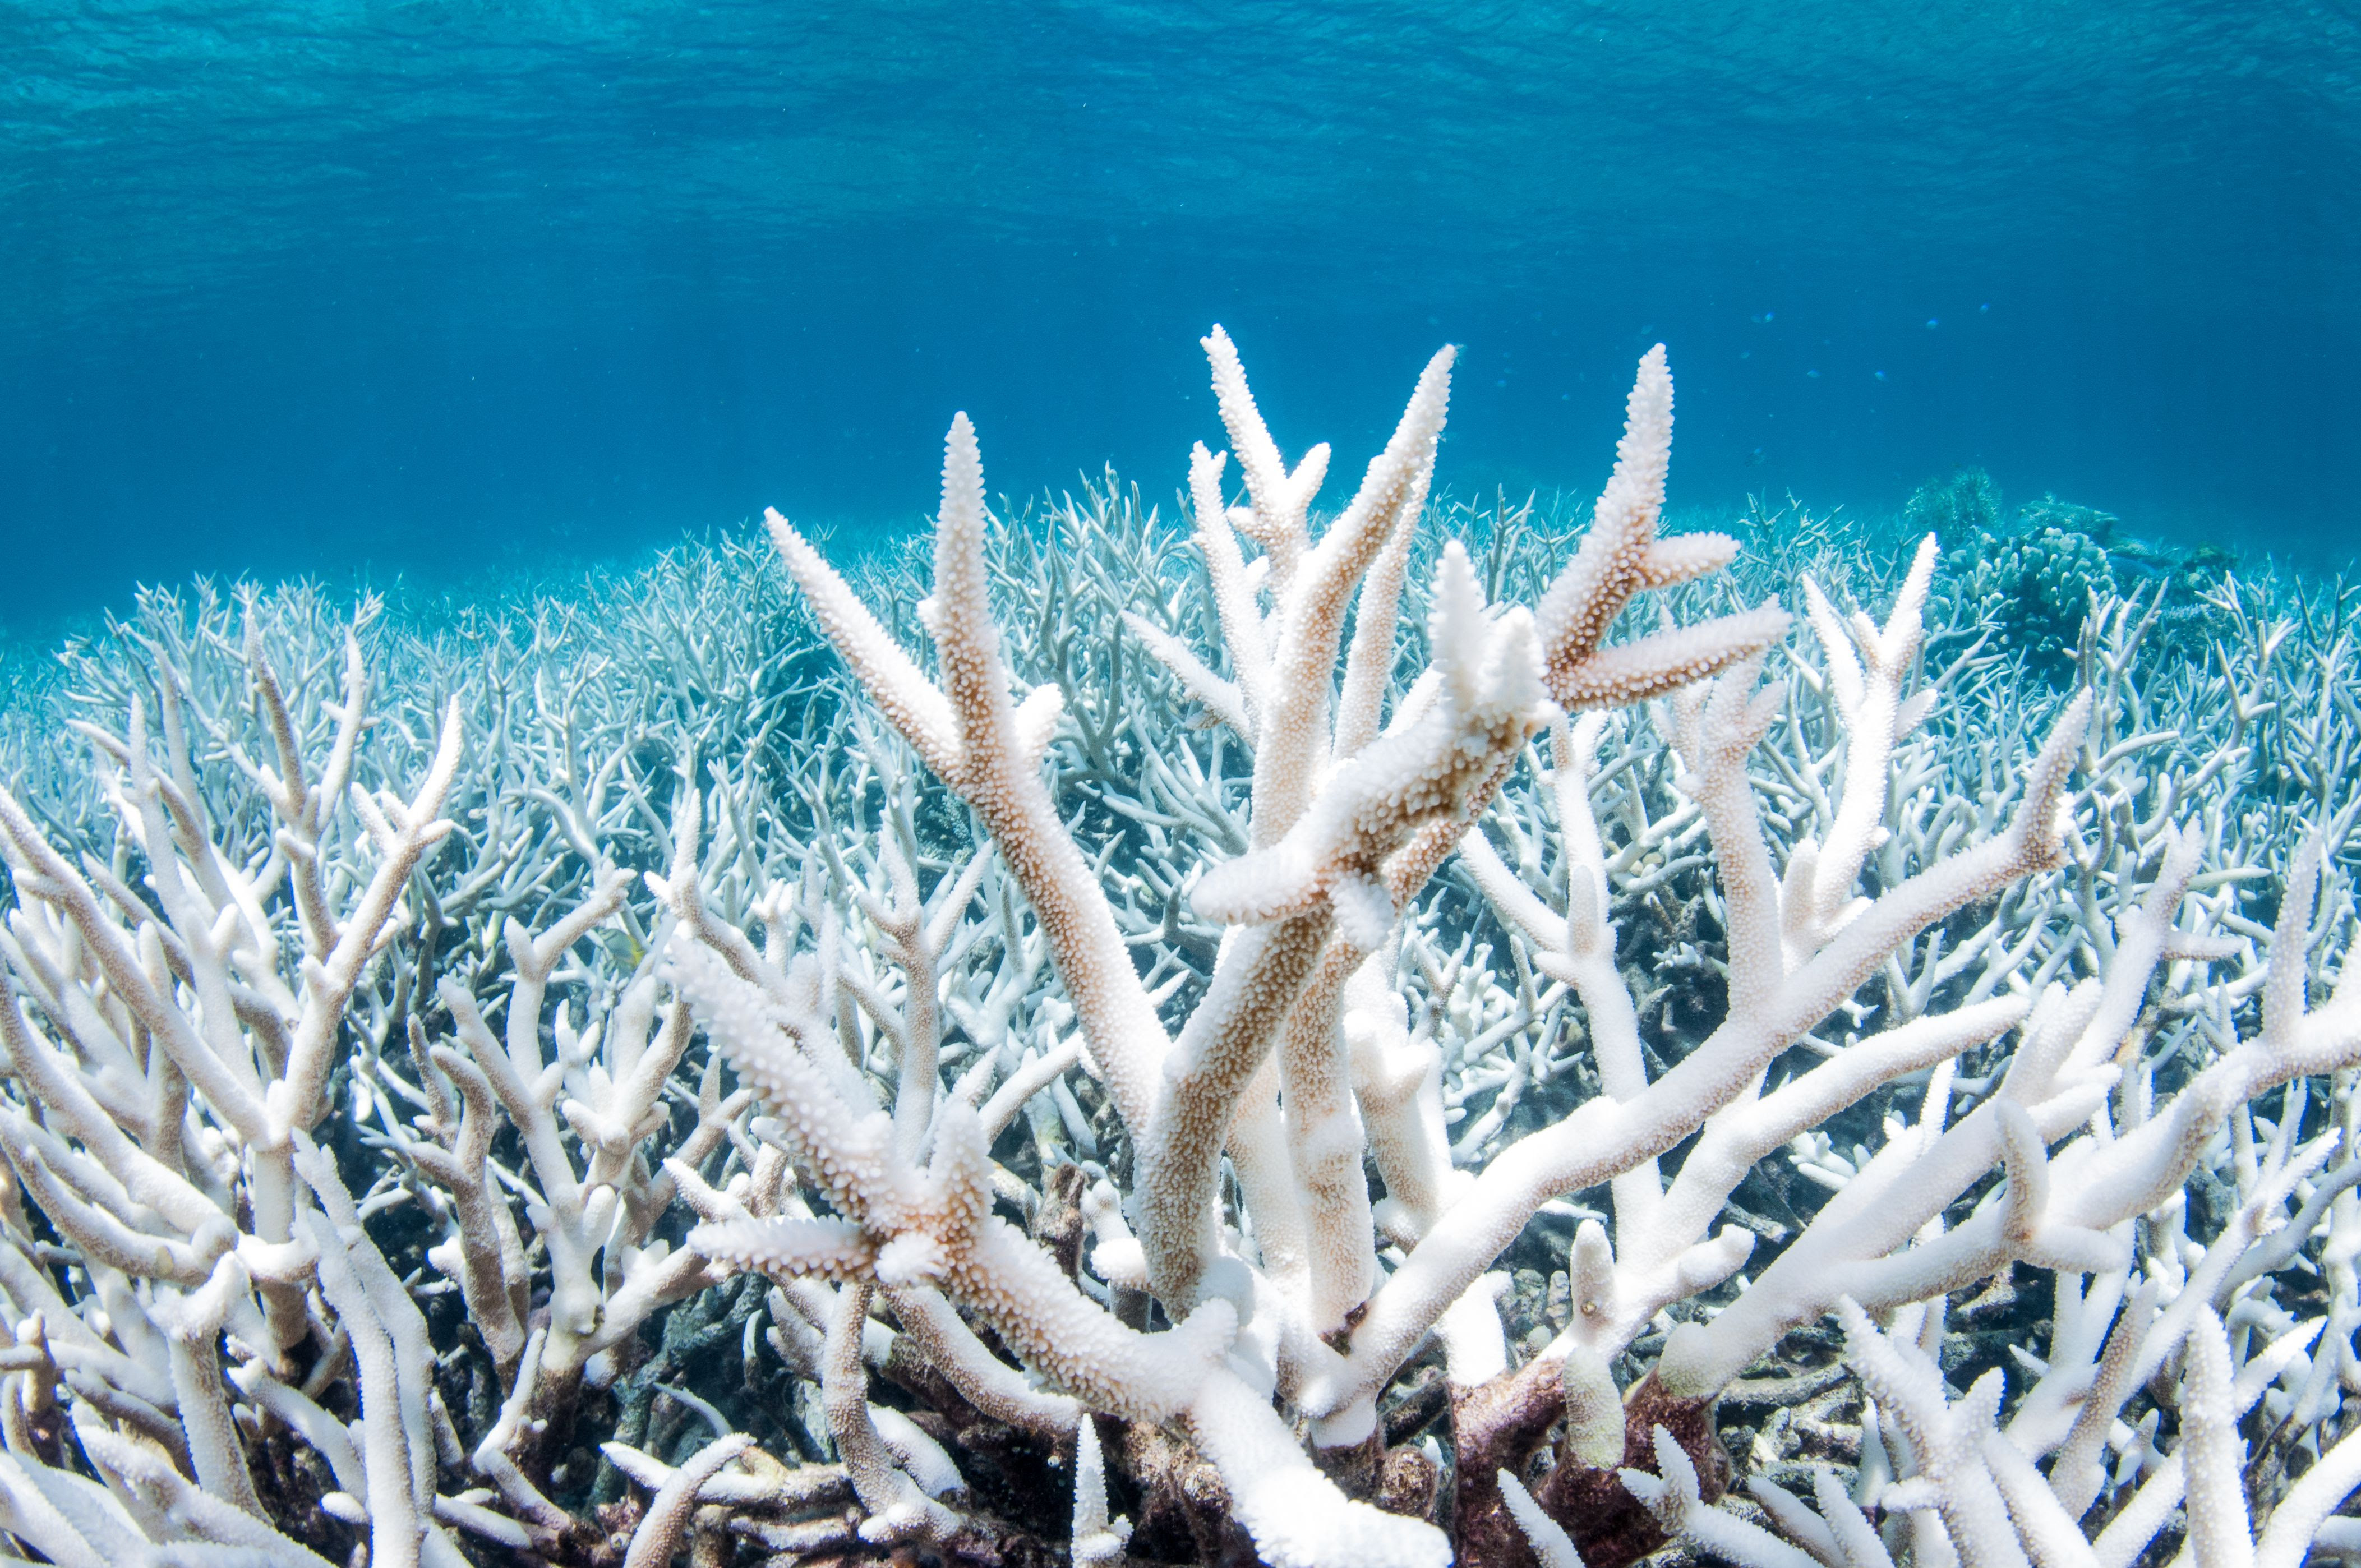 10 Ways to Protect Coral Reefs When You Travel